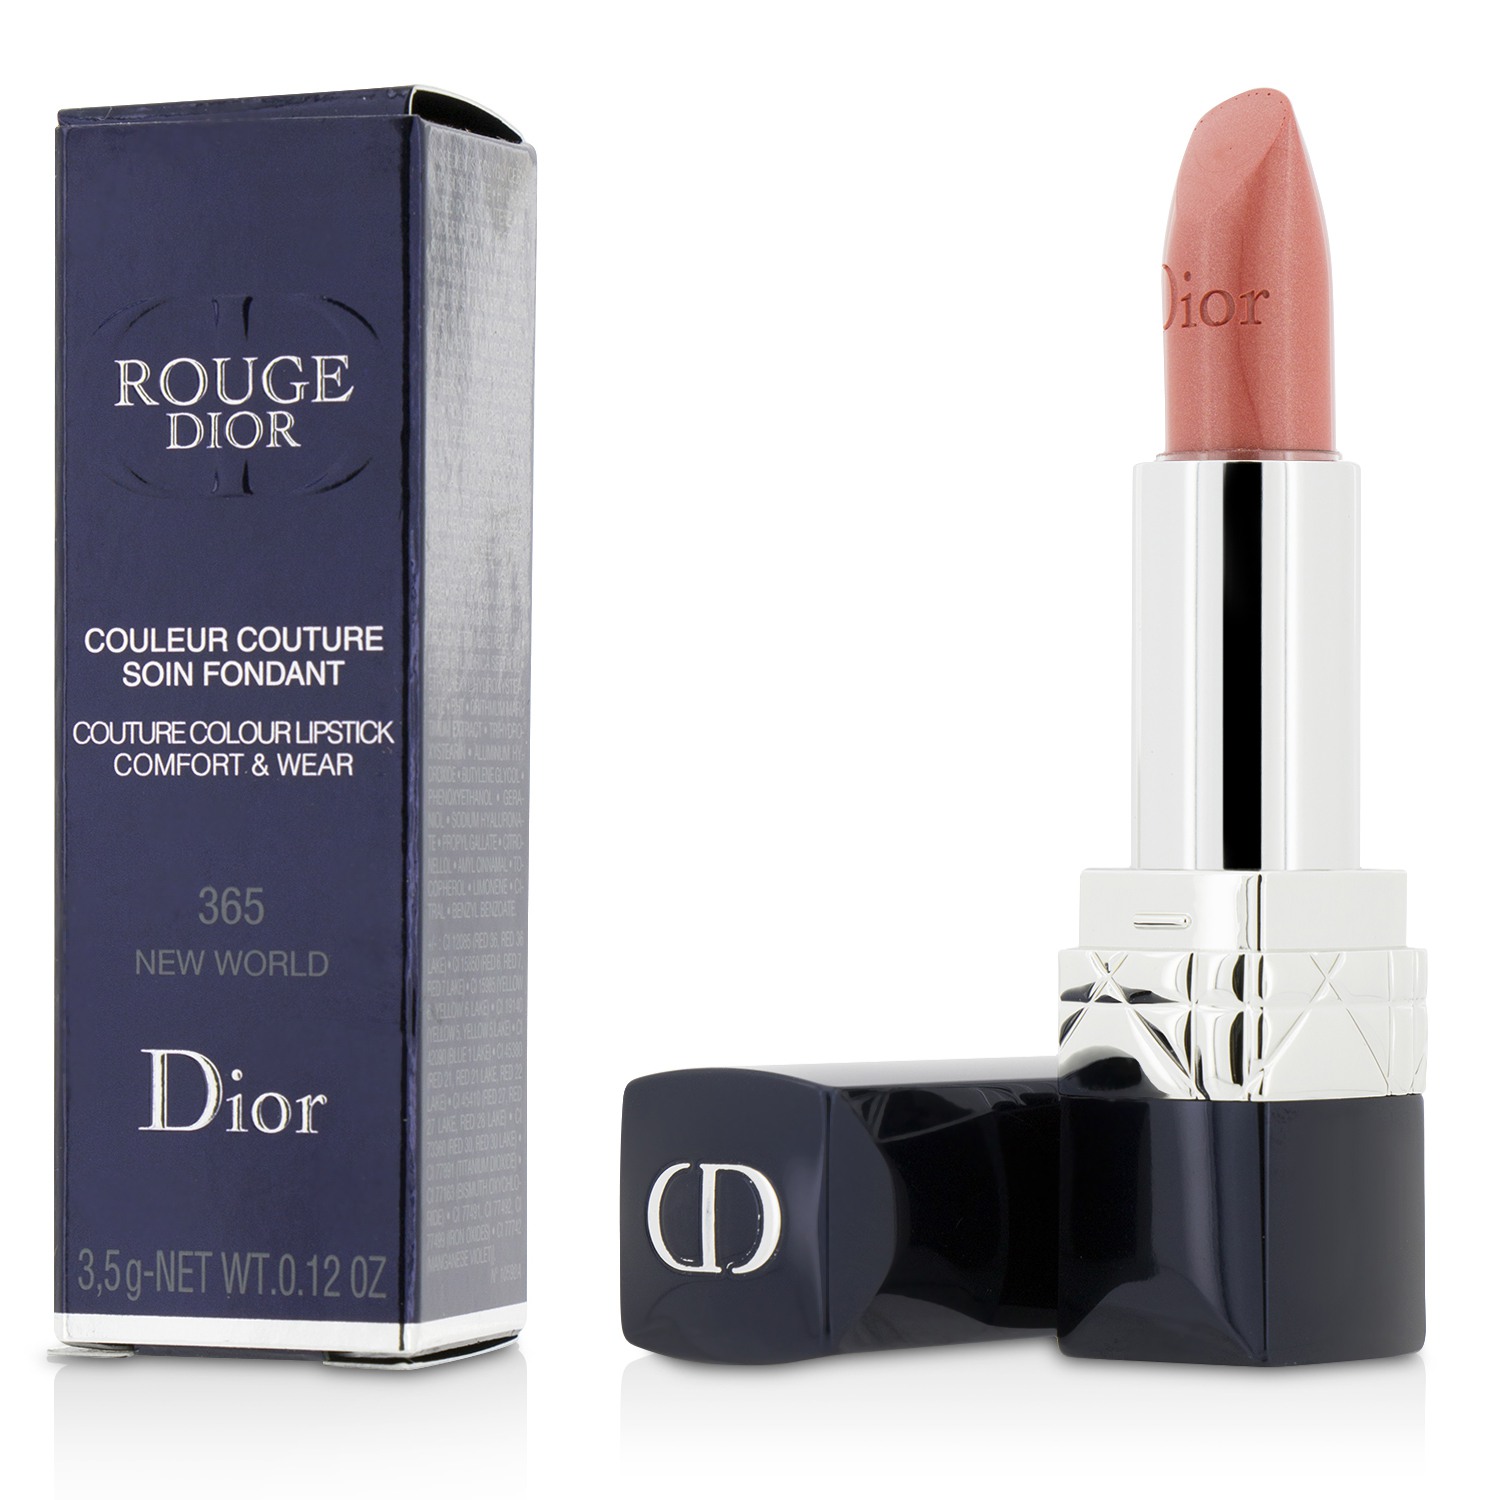 Rouge Dior Couture Colour Comfort & Wear Lipstick - # 365 New World Christian Dior Image